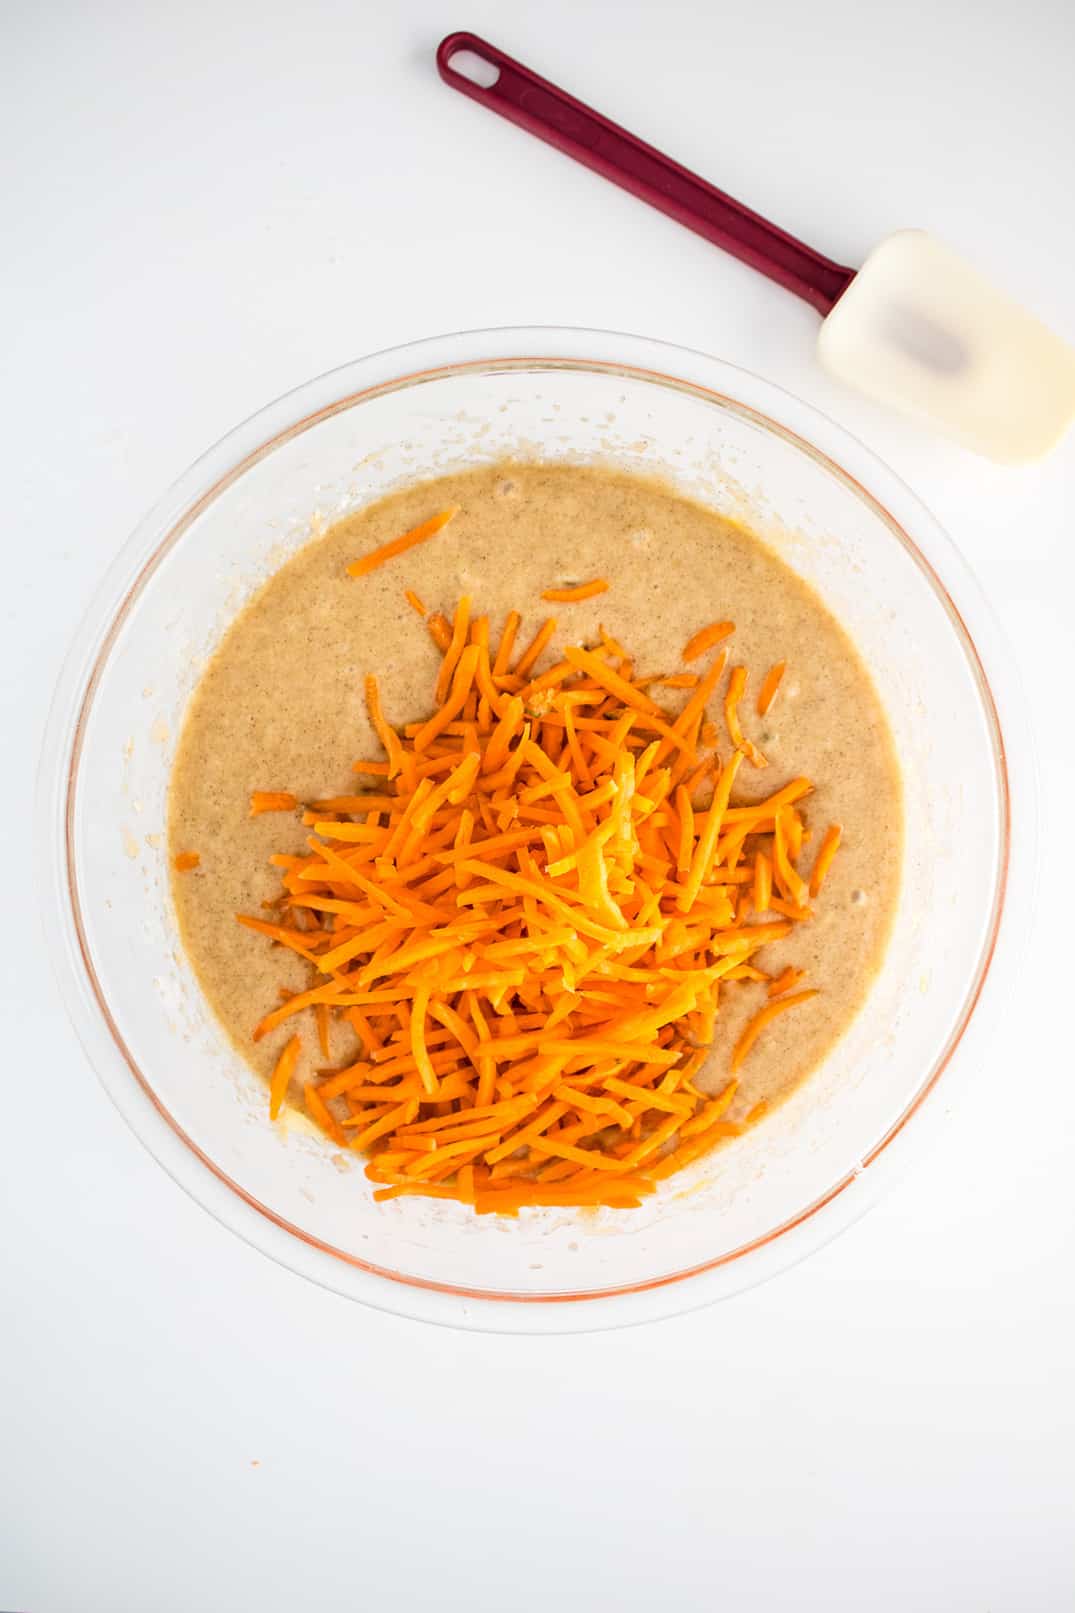 Adding shredded carrots to wet ingredients